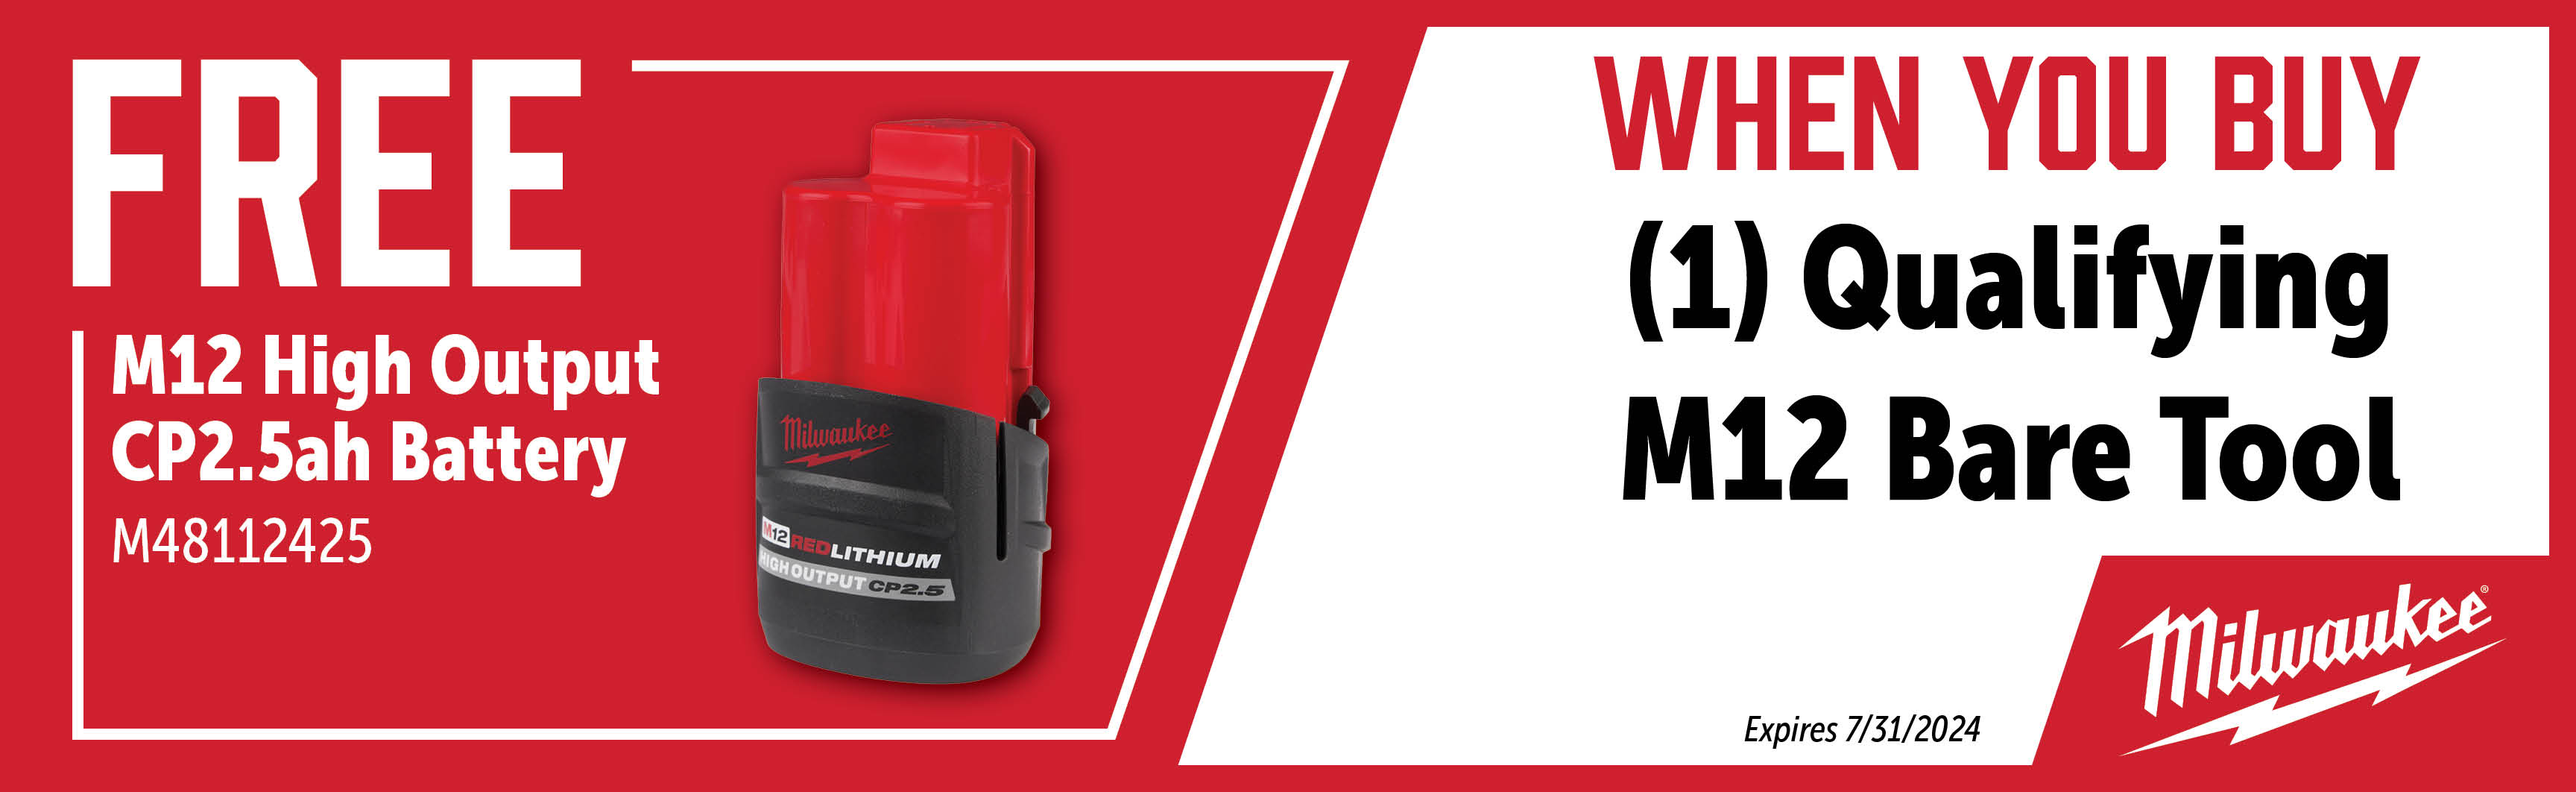 Milwaukee May - July: Buy a Qualifying M12 Bare Tool and Get a M48112425 Free